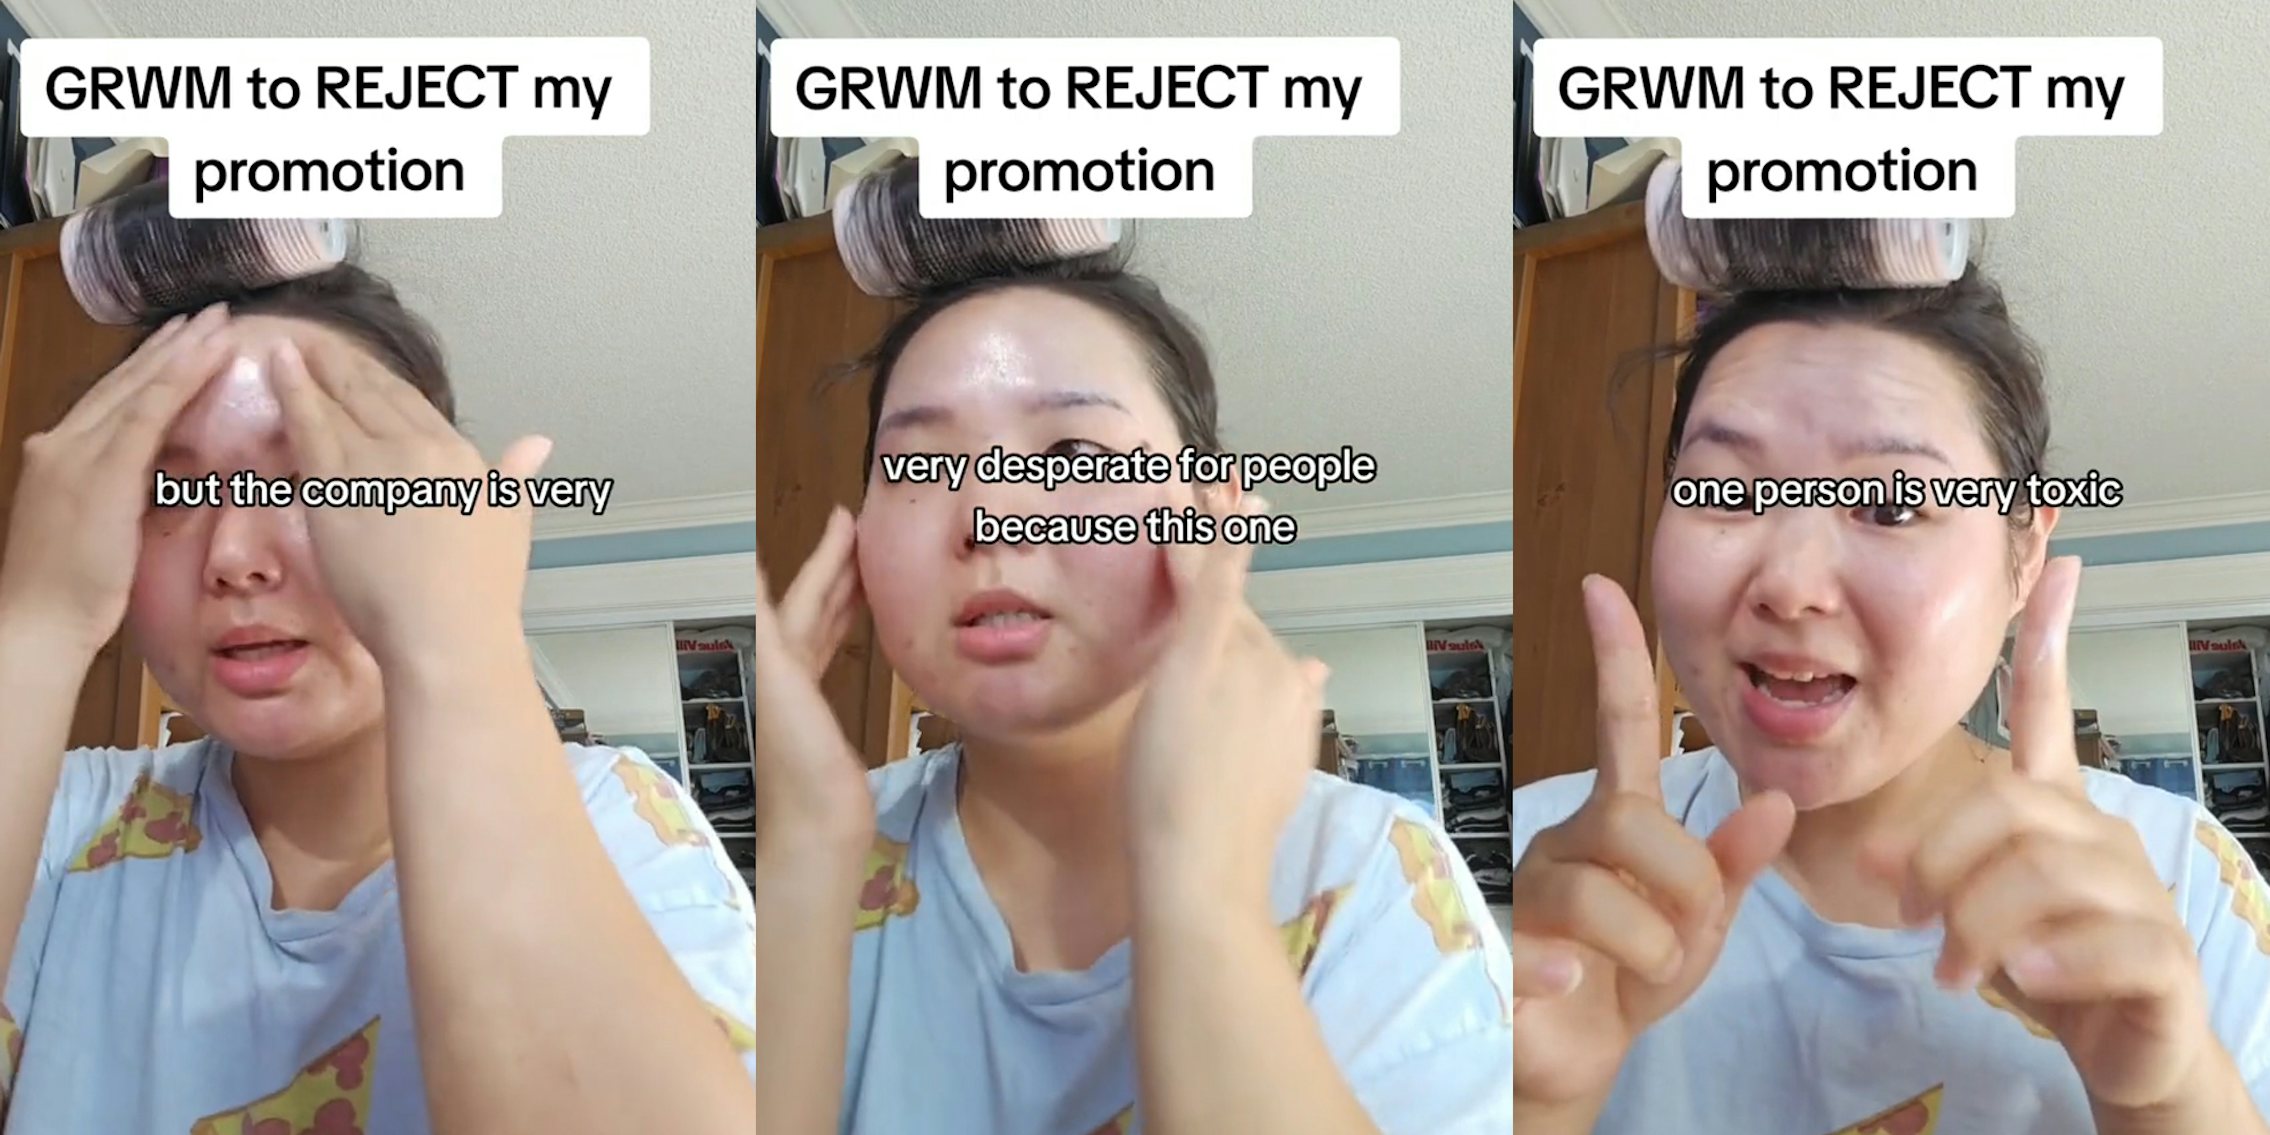 woman applying skincare products with caption 'GRWM to REJECT my promotion but the company is very' (l) woman applying skincare products with caption 'GRWM to REJECT my promotion very desperate for people because this one' (c) woman applying skincare products with caption 'GRWM to REJECT my promotion one person is very toxic' (r)